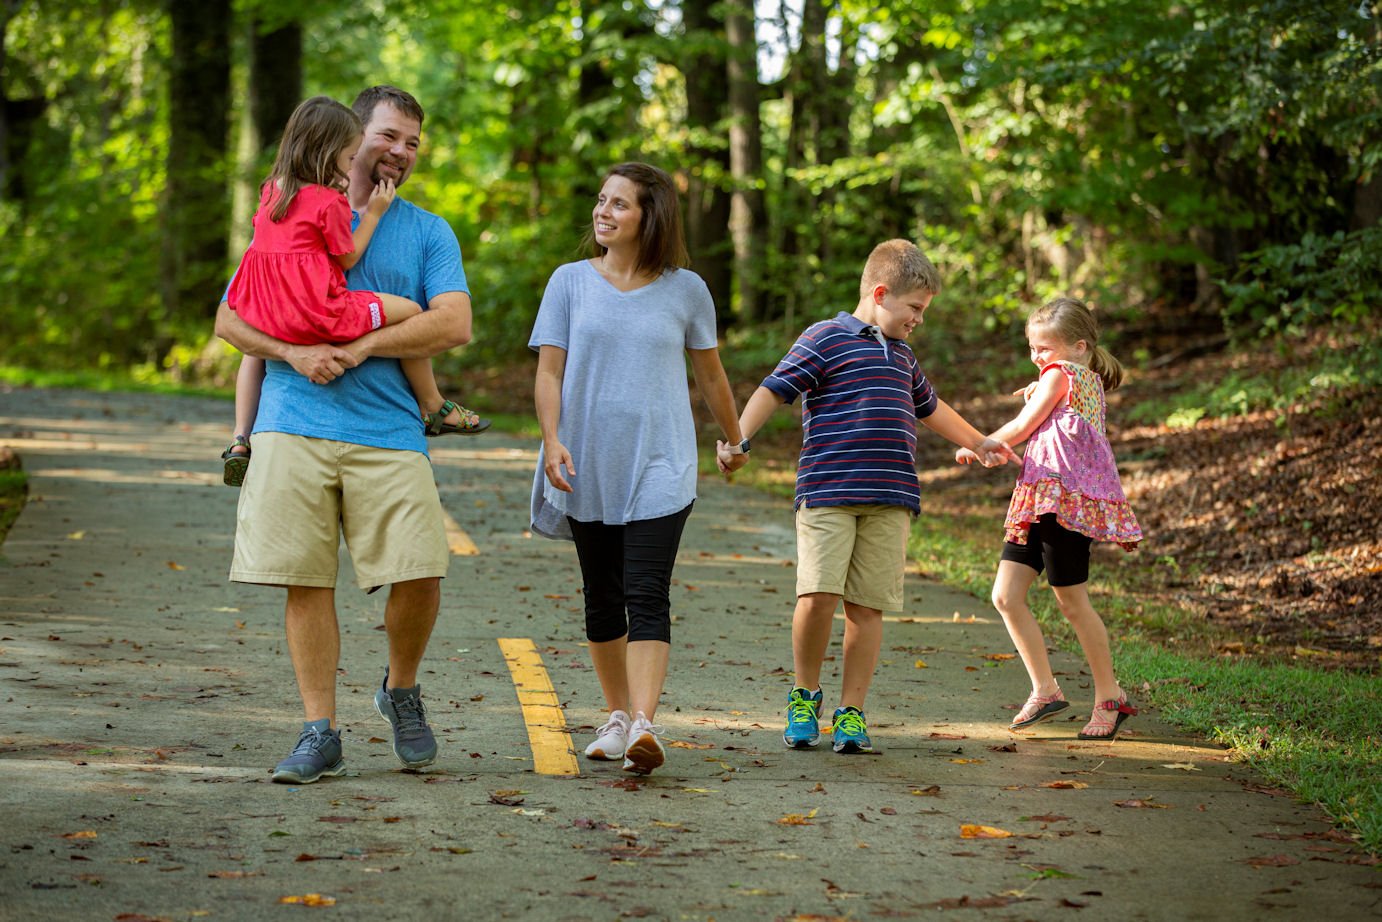 Amanda Riggins and family on walking trail